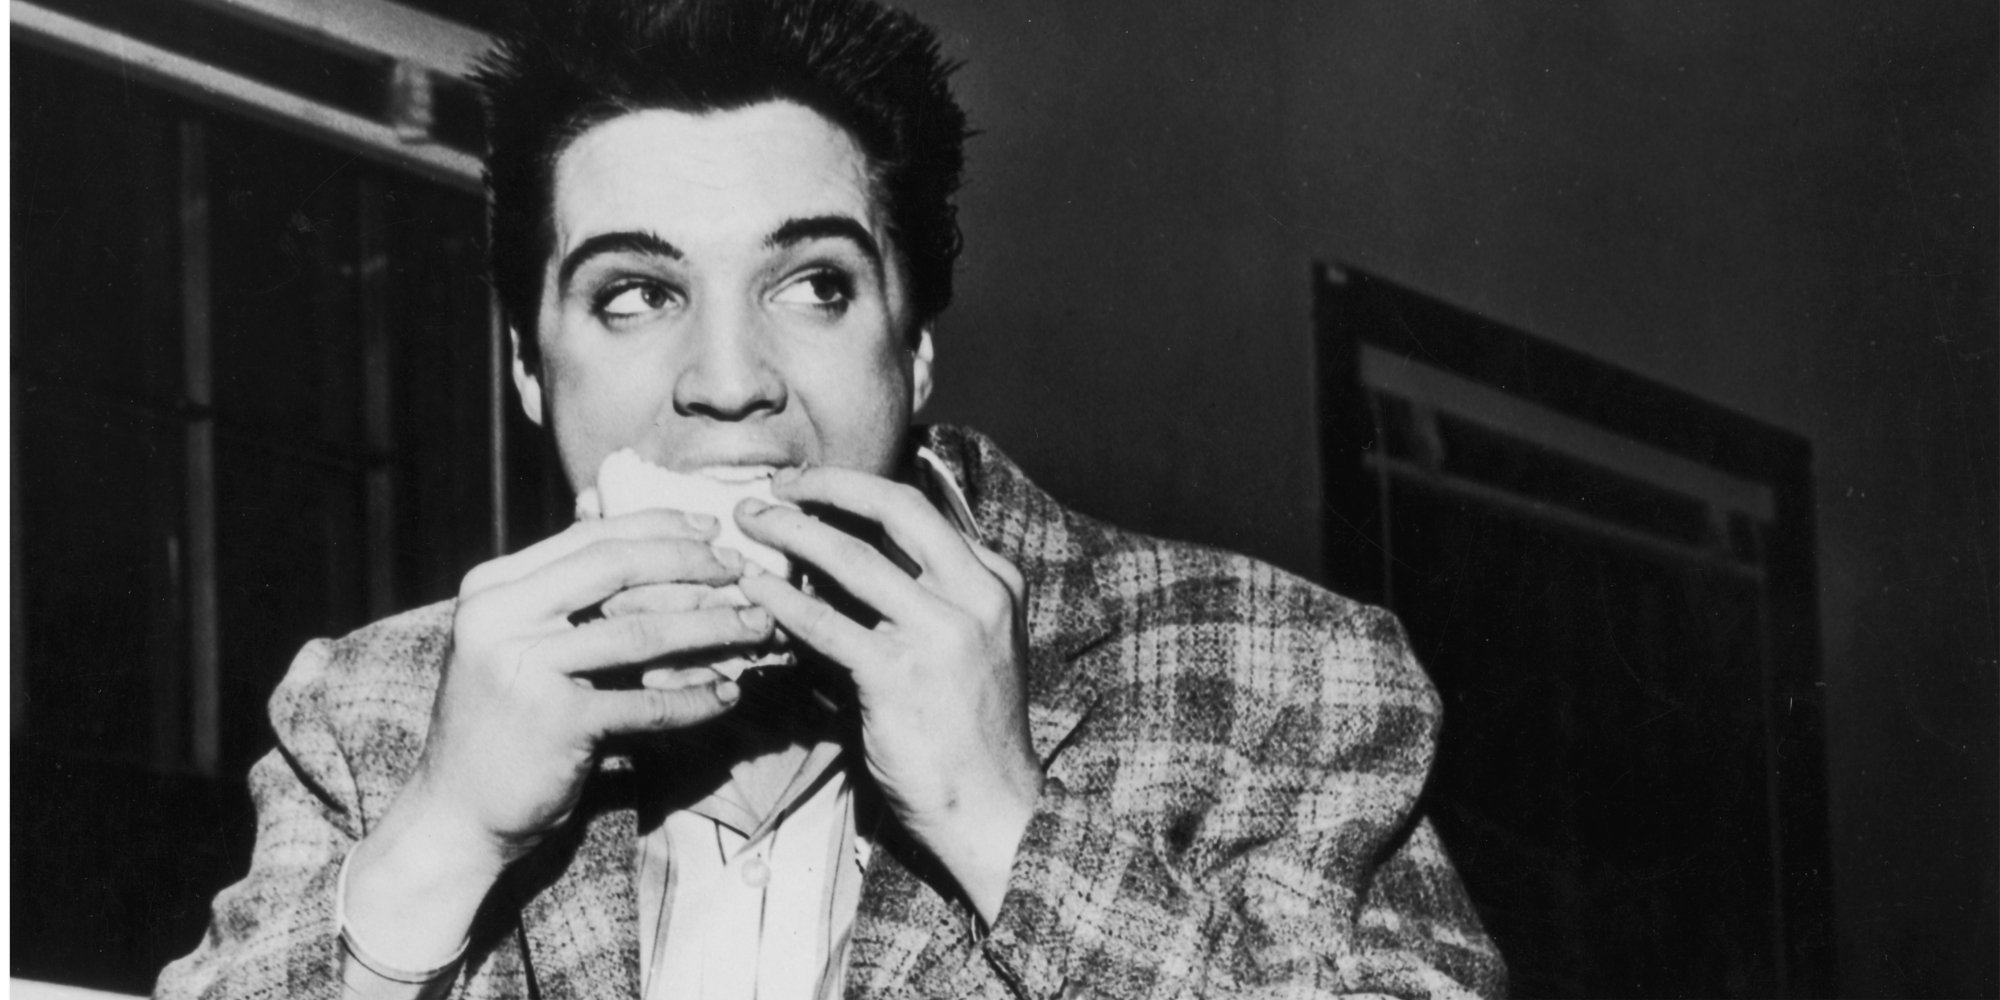 Elvis Presley eating a sandwich minus the one vegetable he hated.